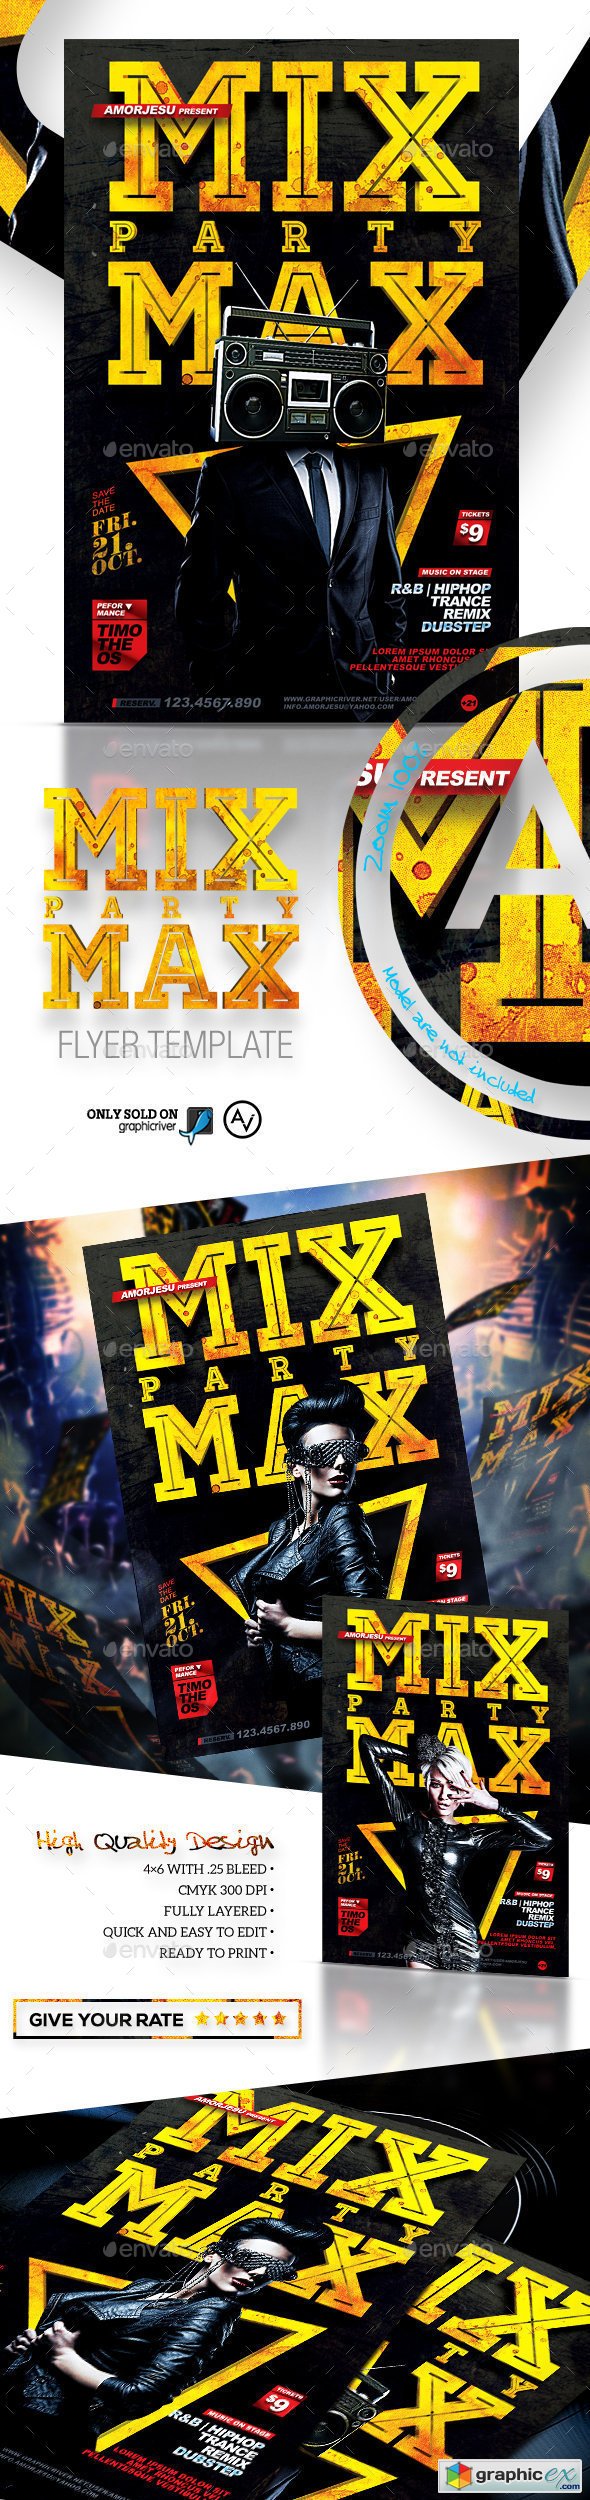 Mix Max Party Flyer Template